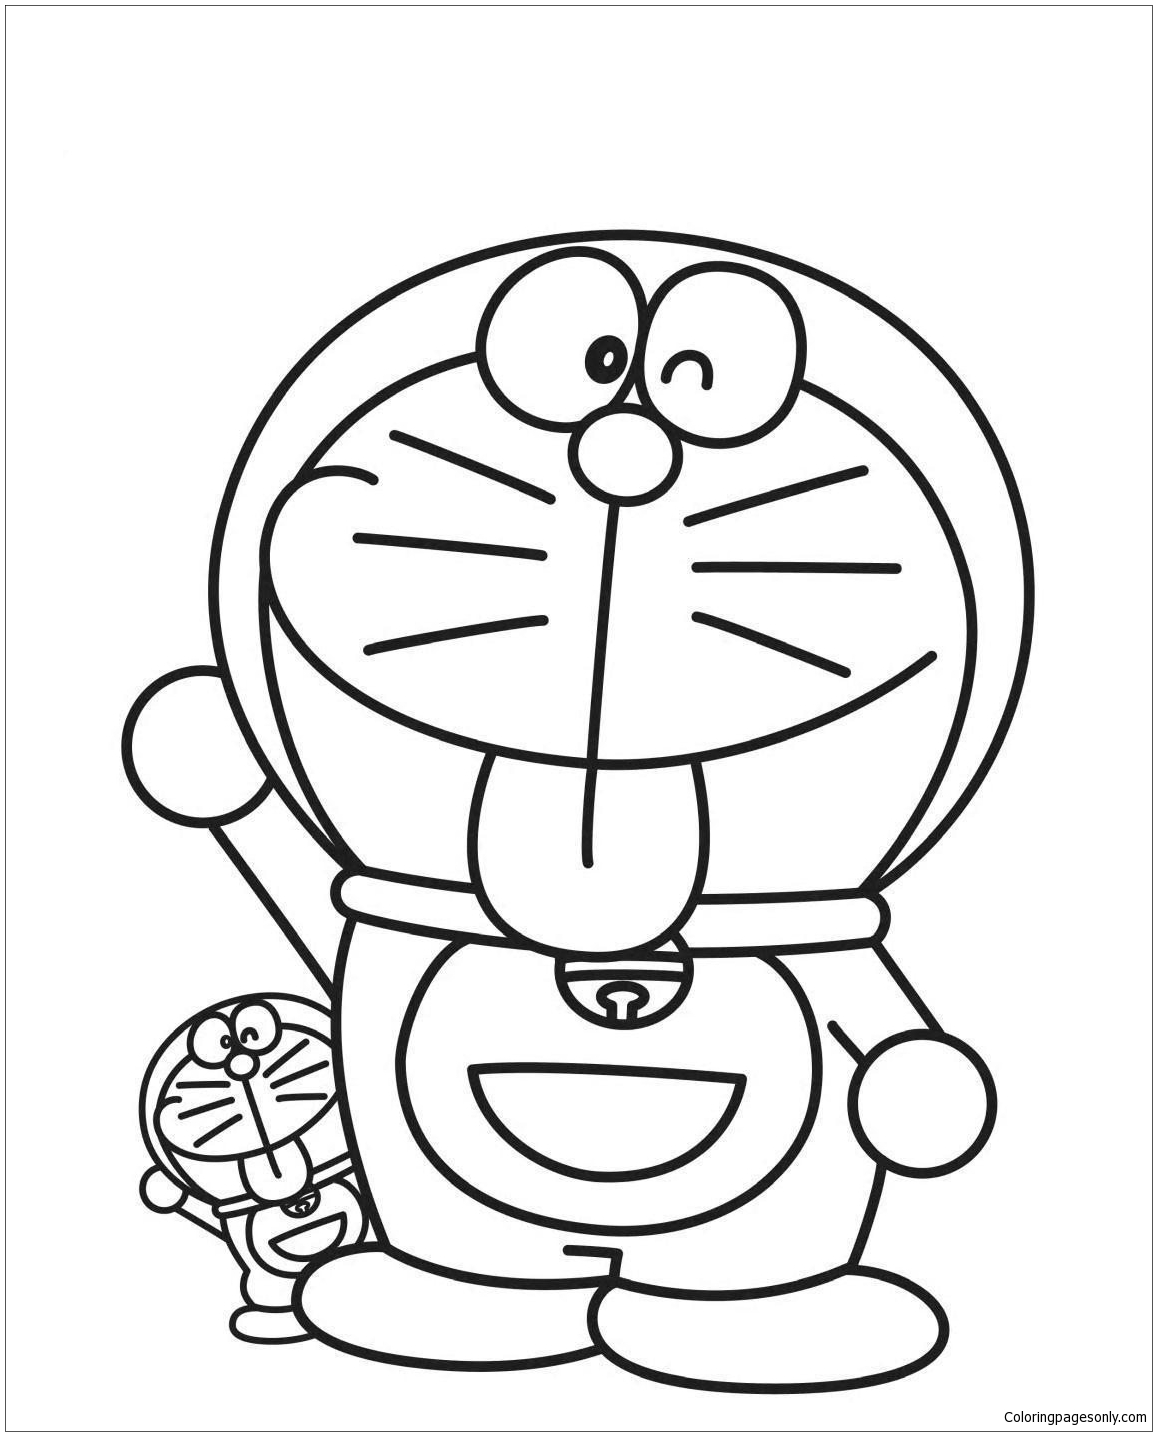 Big And Little Doraemon Coloring Pages